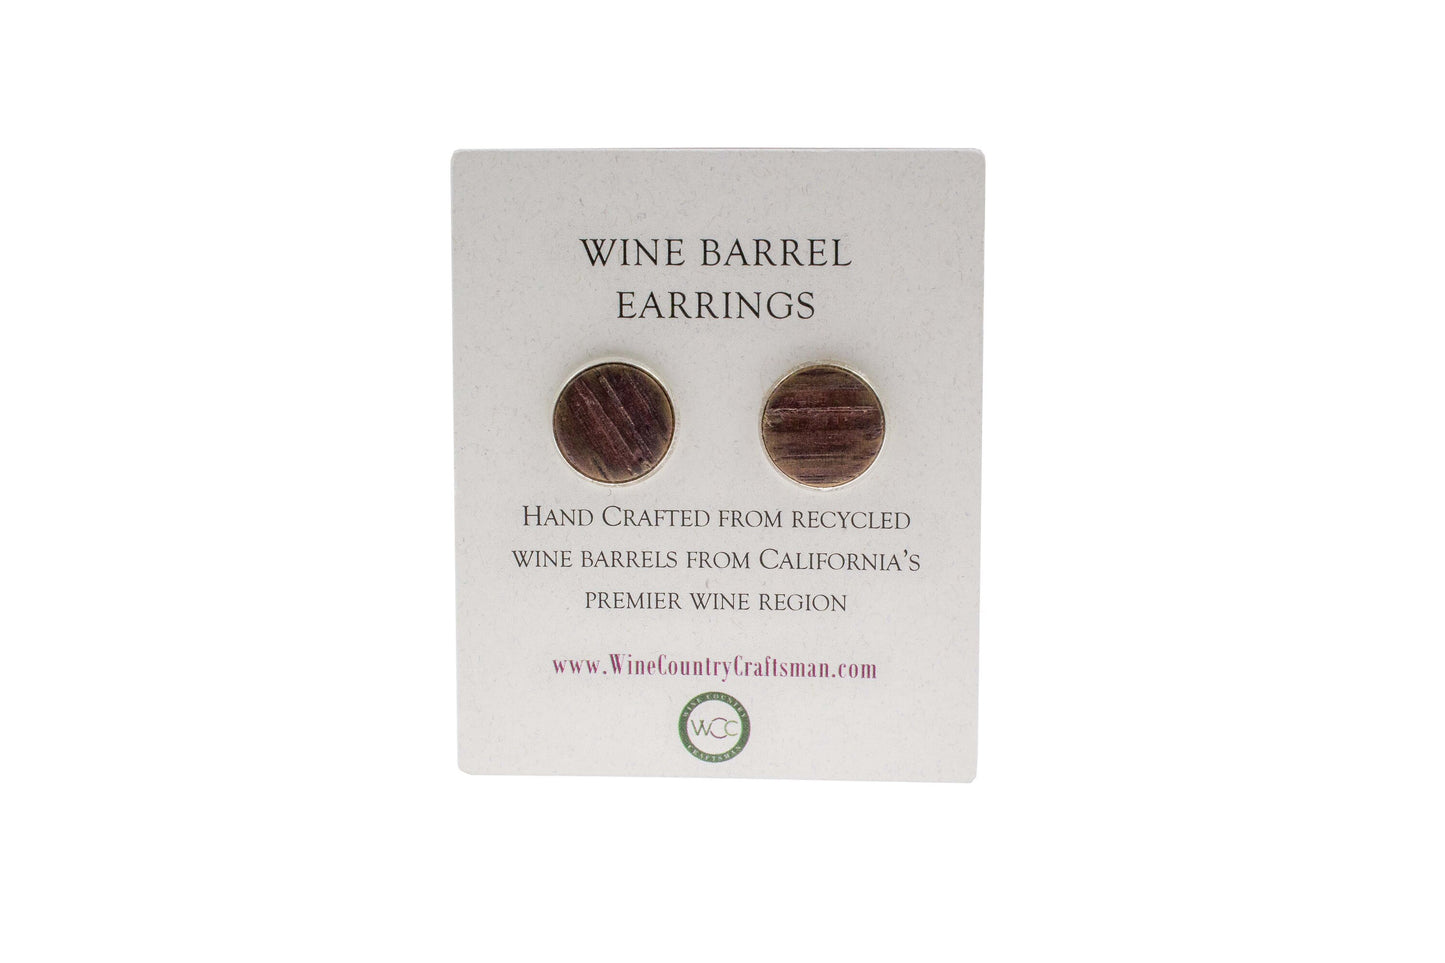 Wine Stave Stud Earrings - Studs - Made from reclaimed California wine barrels. 100% Recycled!